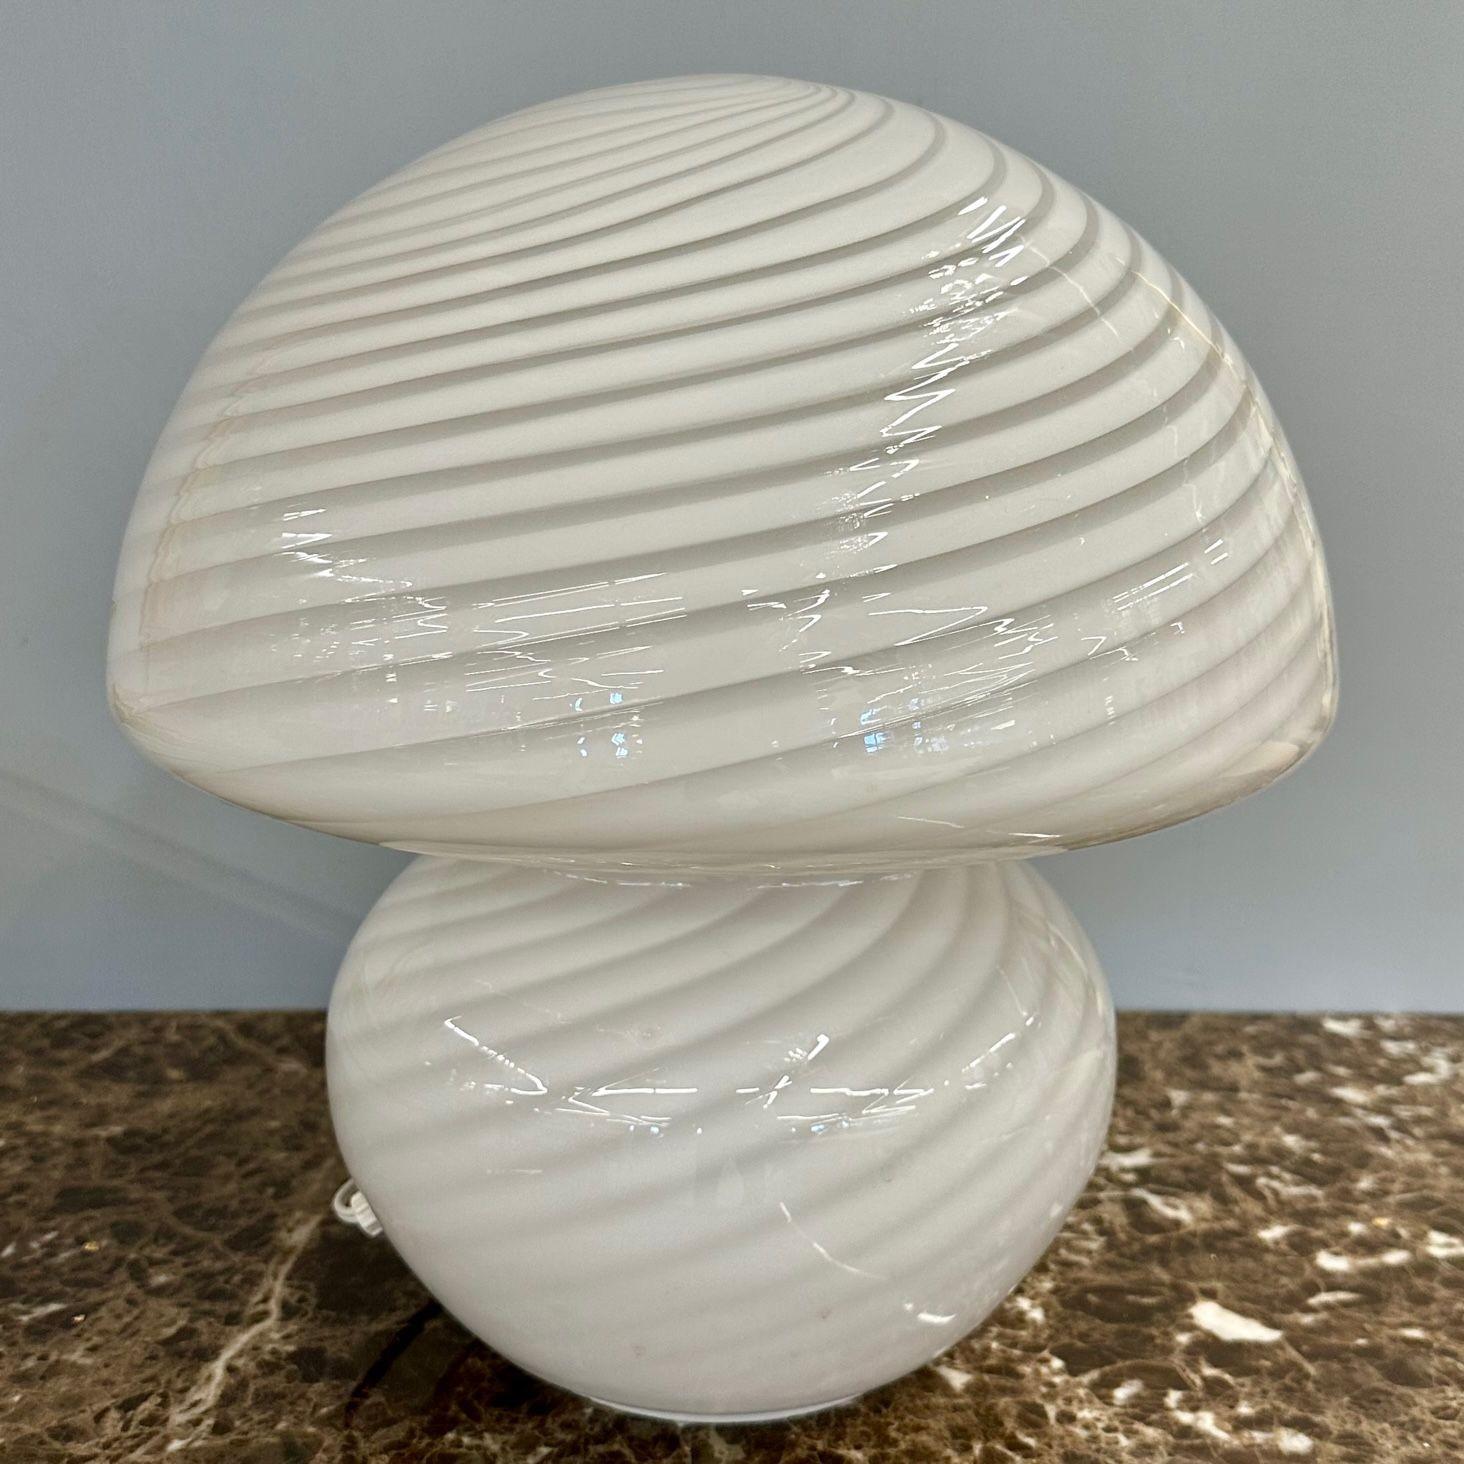 Italian Mid-Century Modern Mushroom Lamp, White Murano Glass, Swirl Blown Glass
 
Mouth blown in a single piece of glass in a rare shape with a swirl pattern. Handmade in Italy.
 
Glass, 14.5